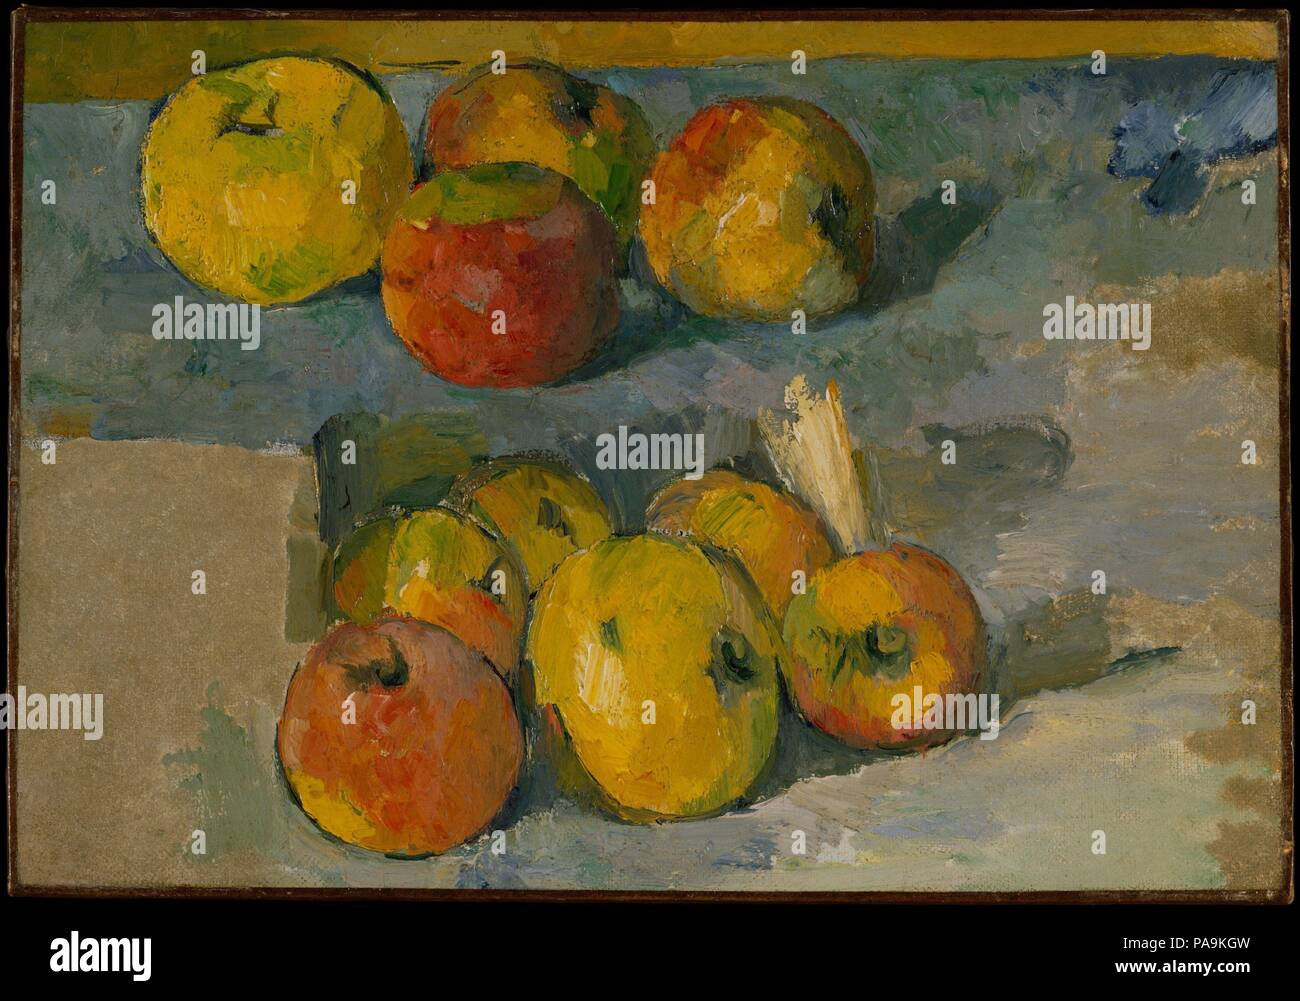 Apples. Artist: Paul Cézanne (French, Aix-en-Provence 1839-1906 Aix-en-Provence). Dimensions: 9 x 13 in. (22.9 x 33 cm). Date: 1878-79.    This composition combines two separate studies that are unrelated to any known painting by Cézanne. The brownish tone that covers areas at the lower left and along the right edge may have been added by Cézanne's dealer, Ambroise Vollard, who sold this picture to the painter Édouard Vuillard in exchange for one of the artist's own works. The present canvas is thought to date to 1878-79, but 1883-87 has also been proposed. Museum: Metropolitan Museum of Art,  Stock Photo